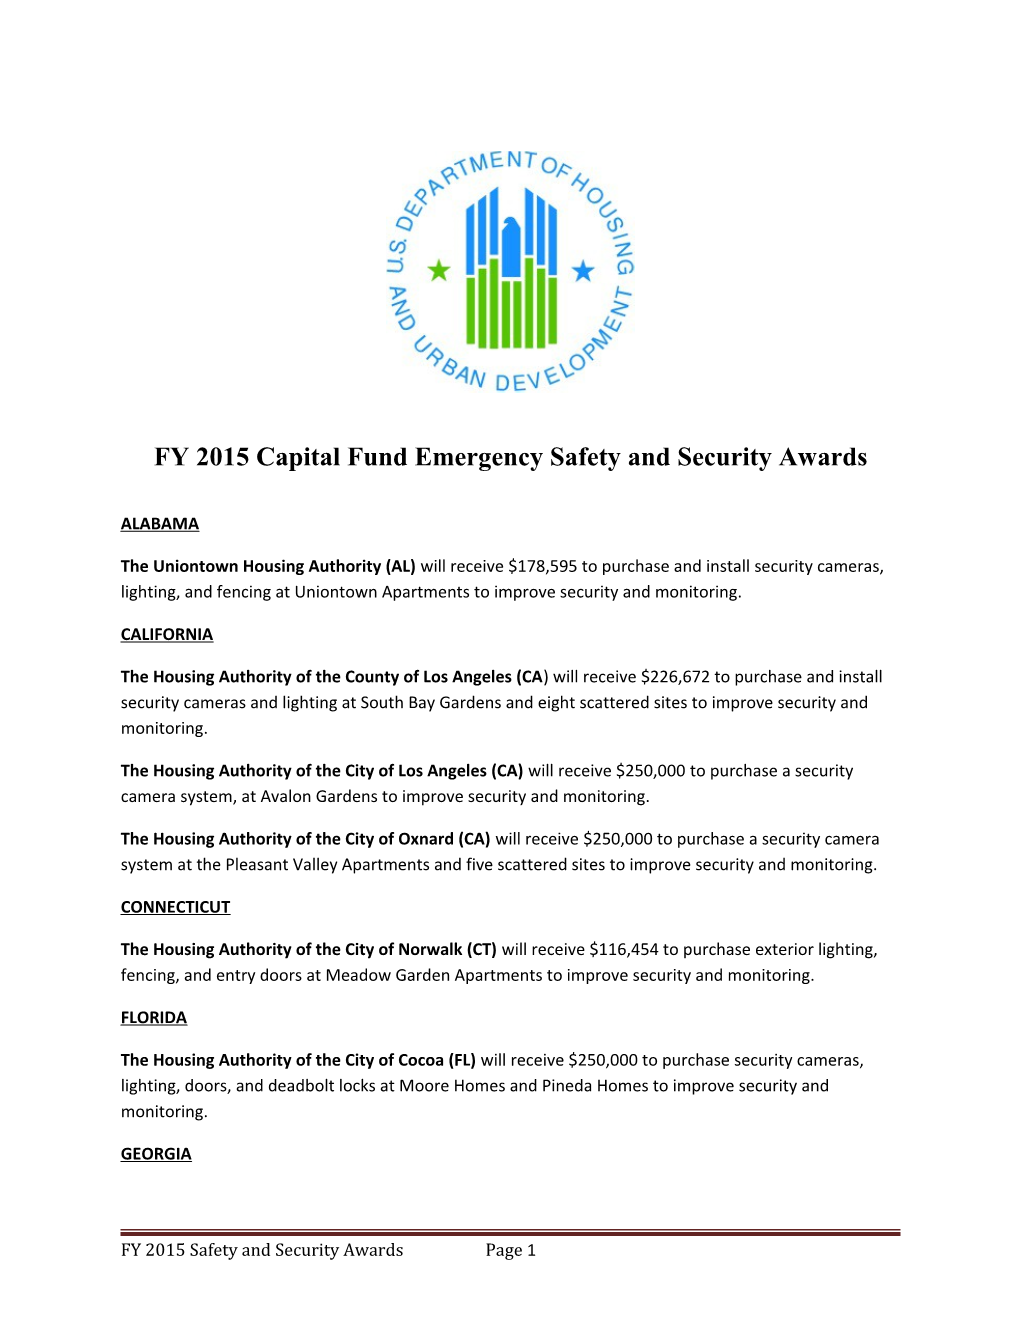 FY 2015 Capital Fund Emergency Safety and Security Awards